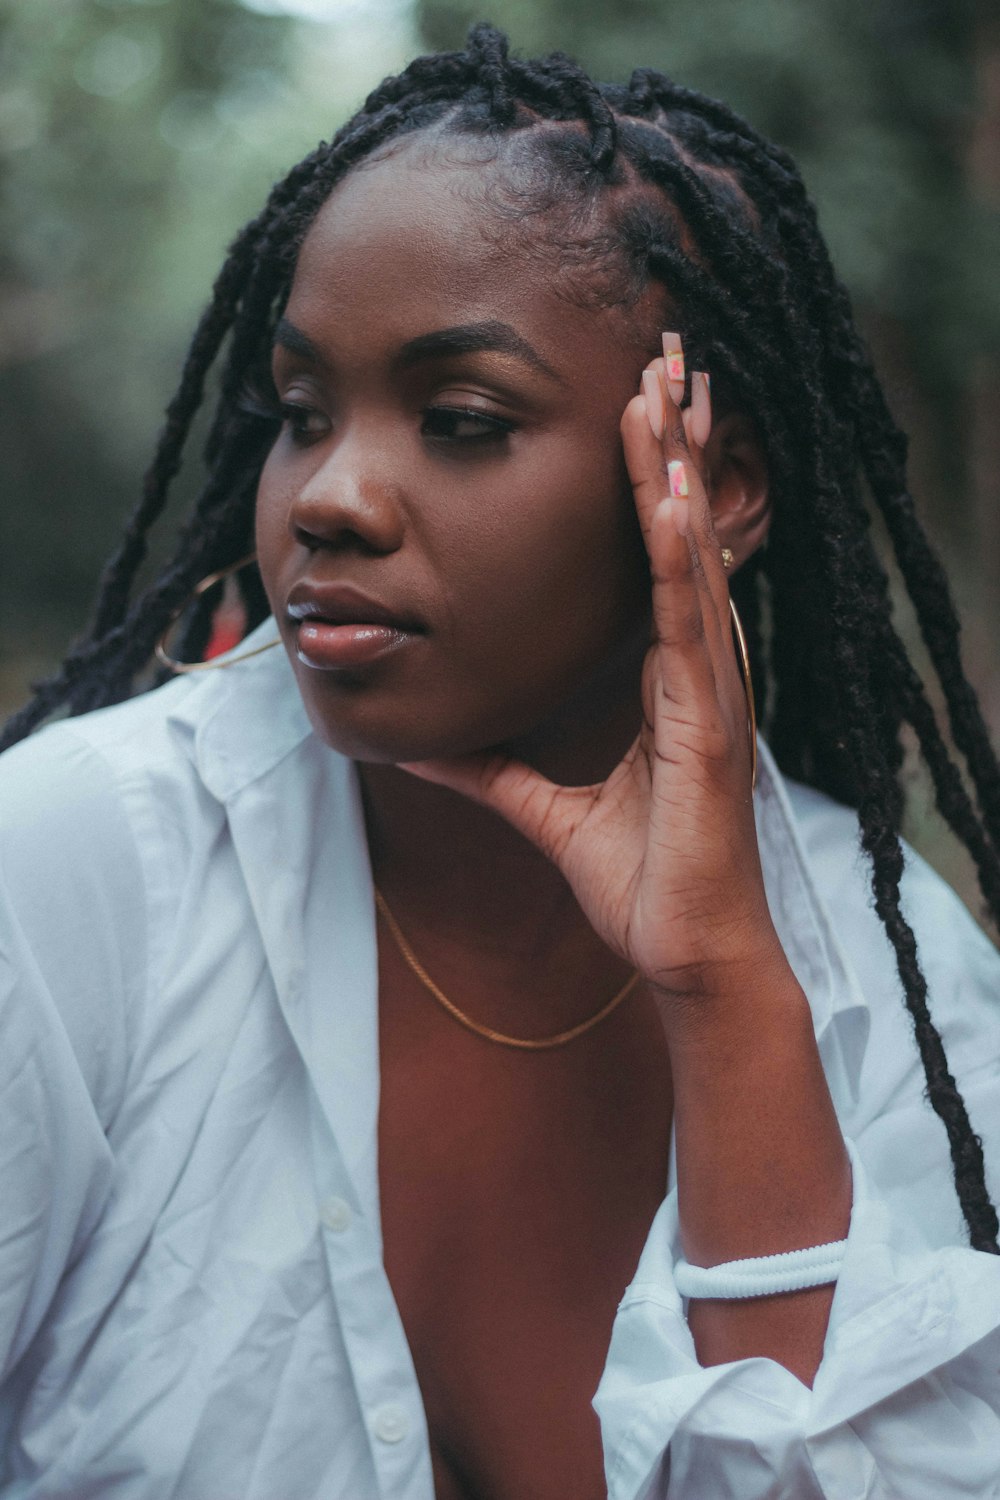 a woman with dreadlocks is holding her hand up to her ear